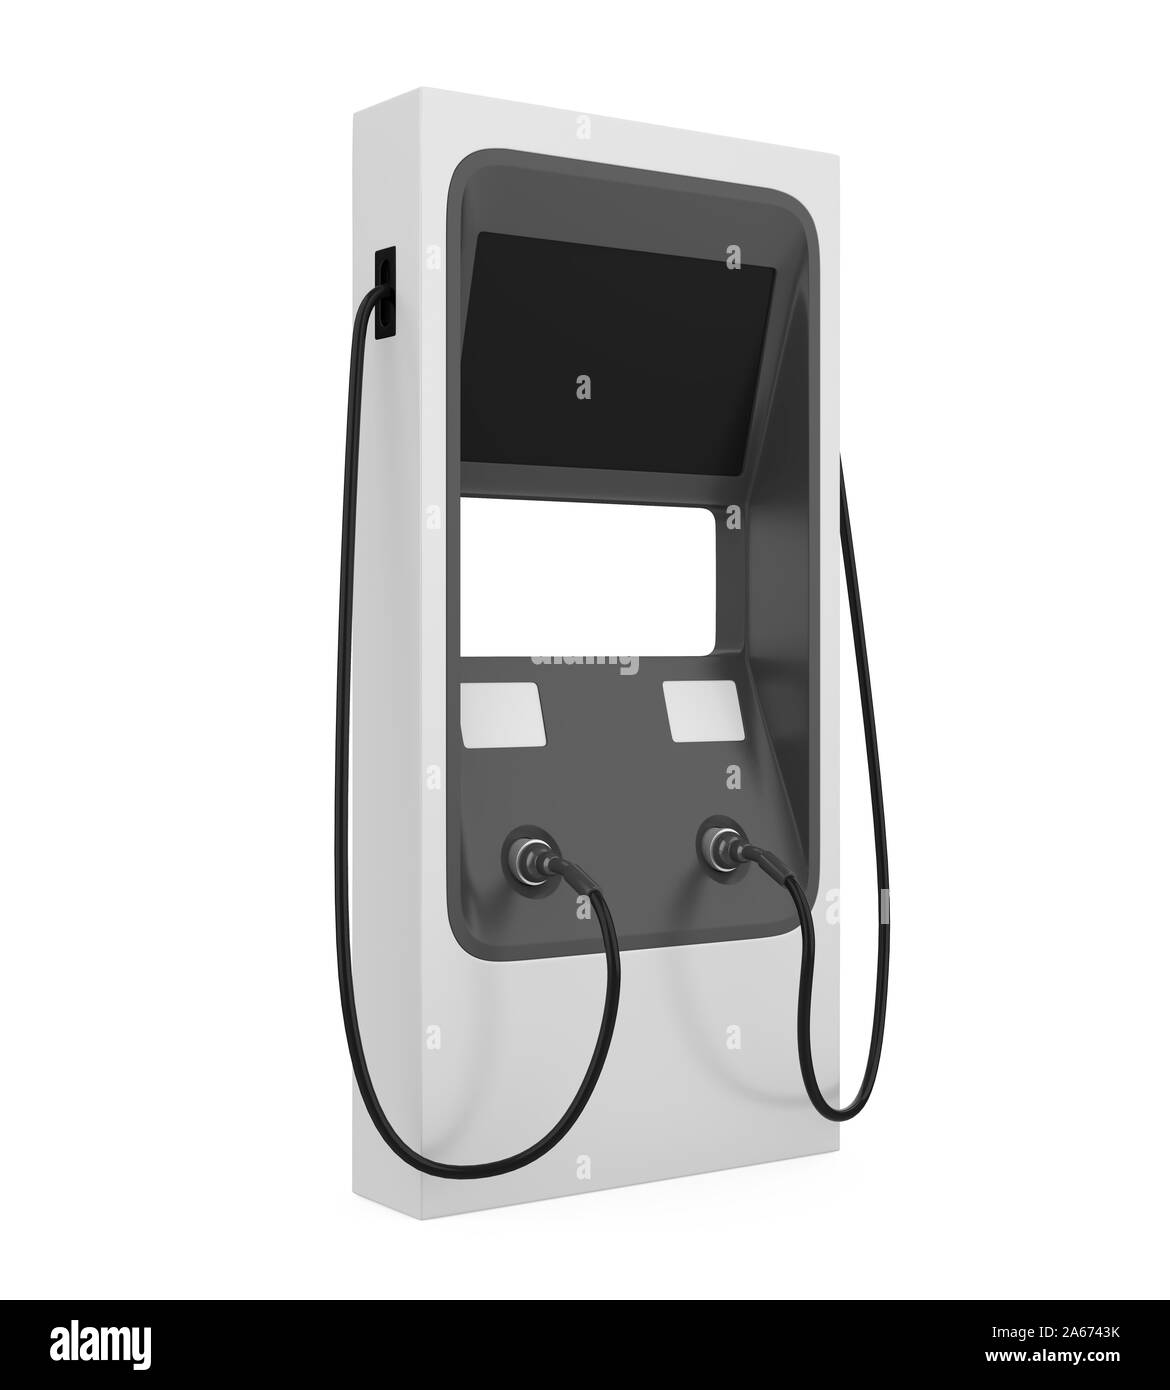 Electric Vehicle Charging Station Isolated Stock Photo